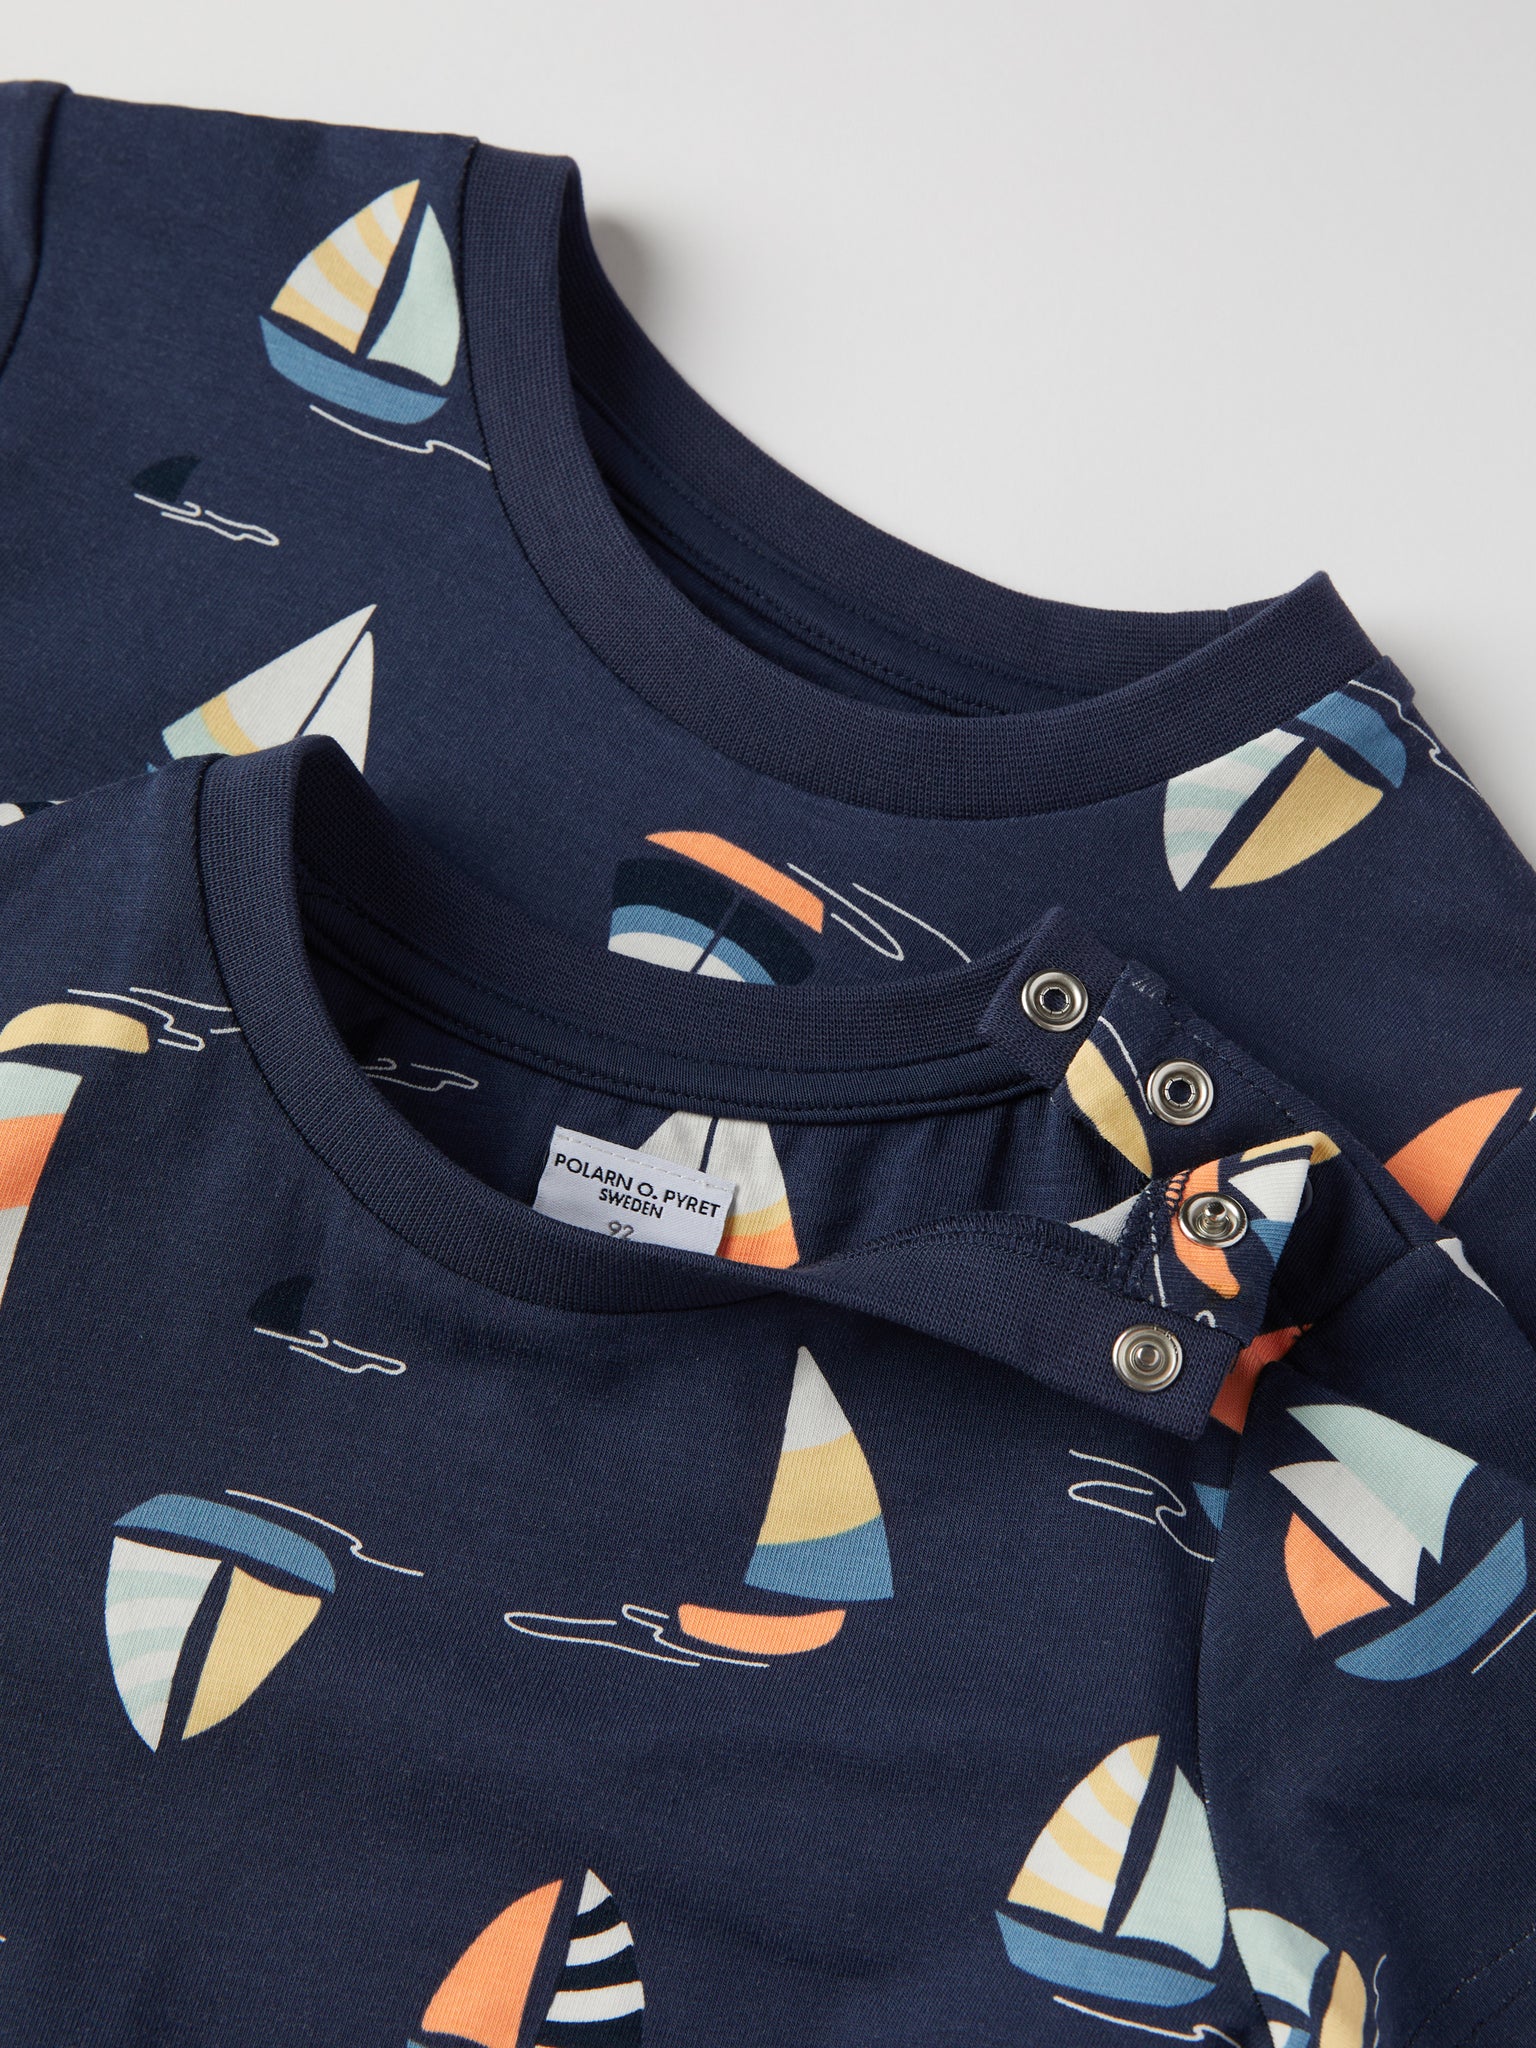 Ice Cream Print T-Shirt from the Polarn O. Pyret kidswear collection. The best ethical kids clothes